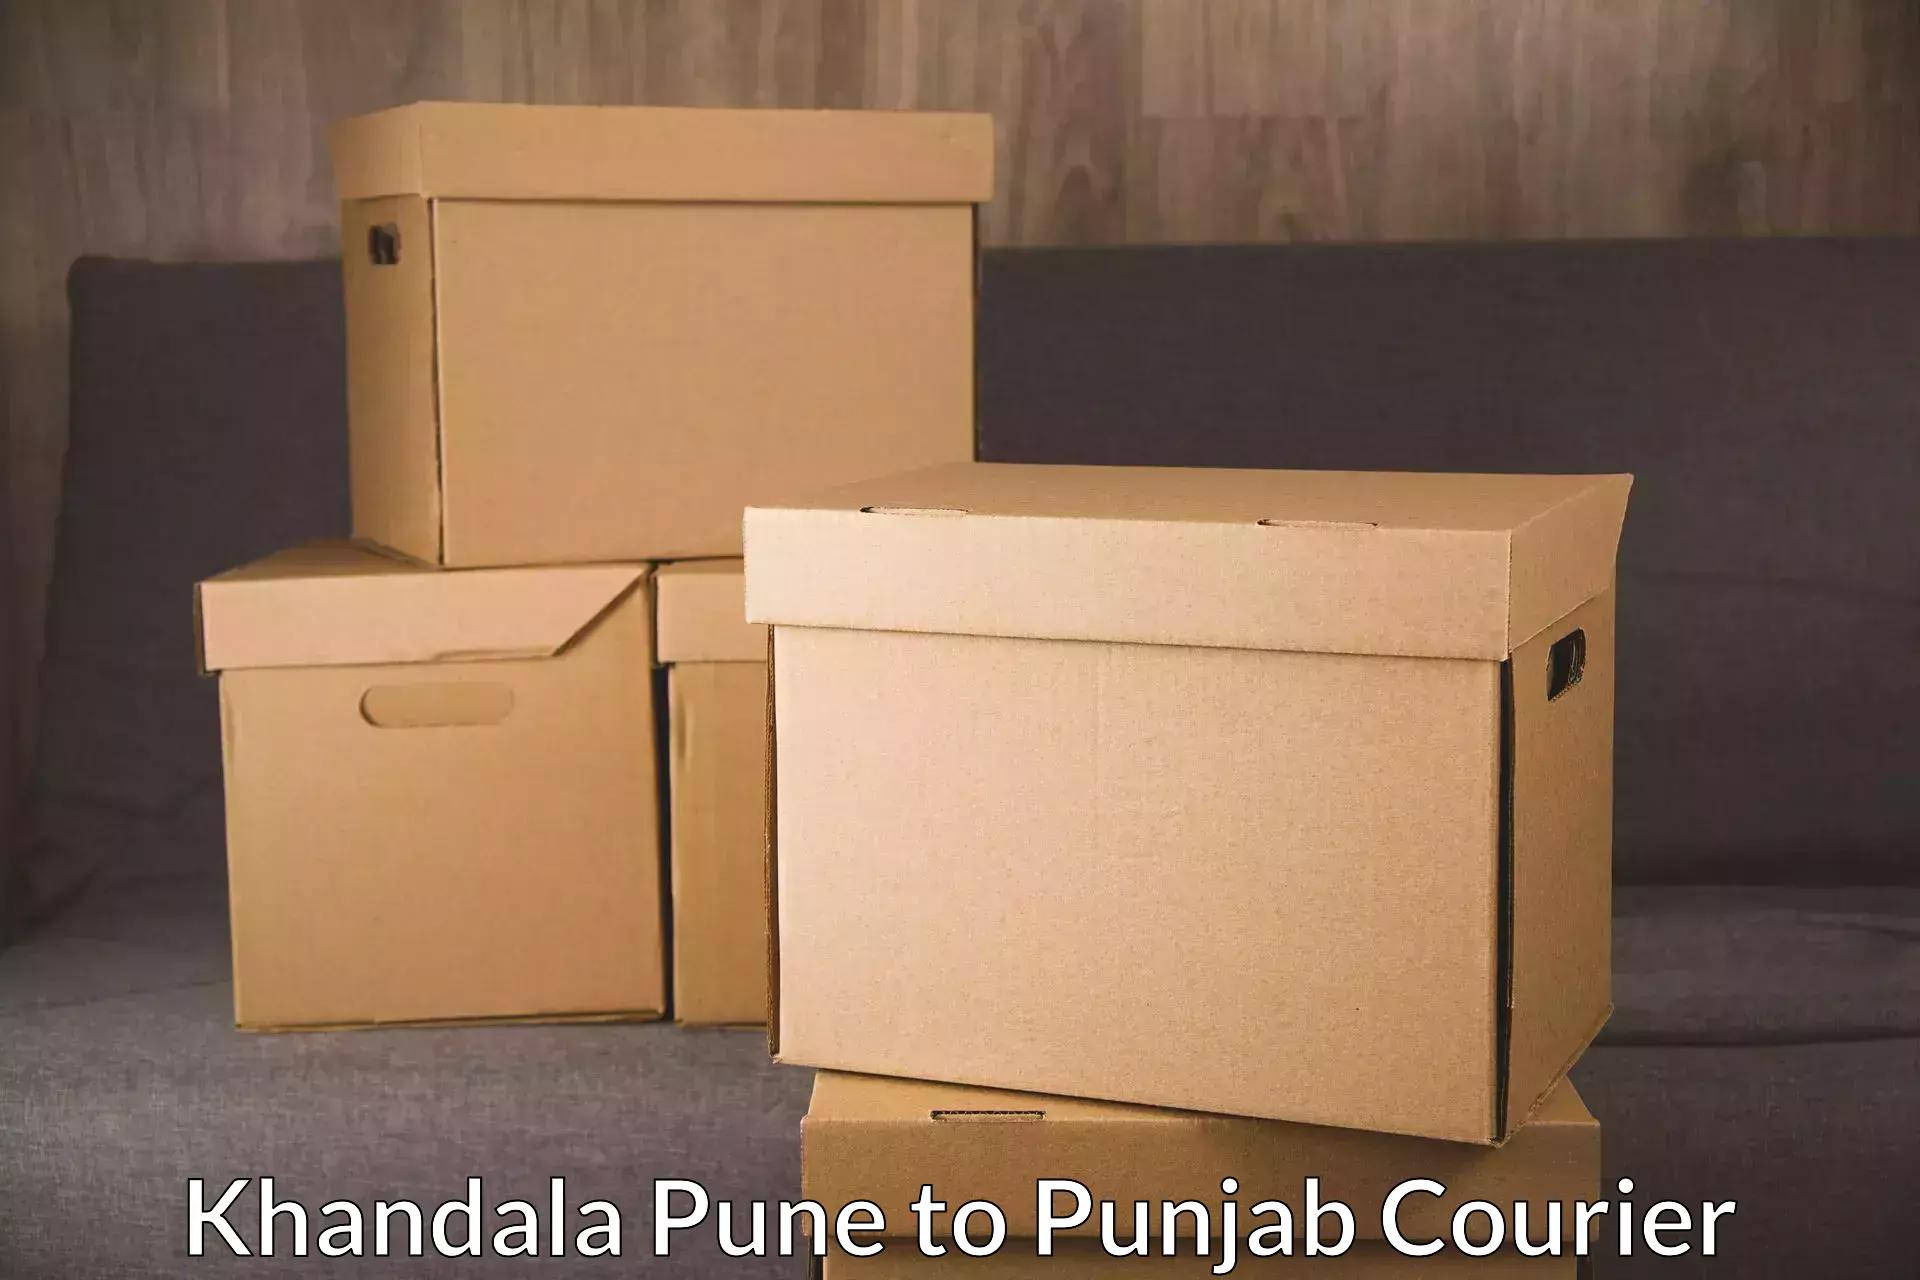 Easy access courier services in Khandala Pune to Patiala